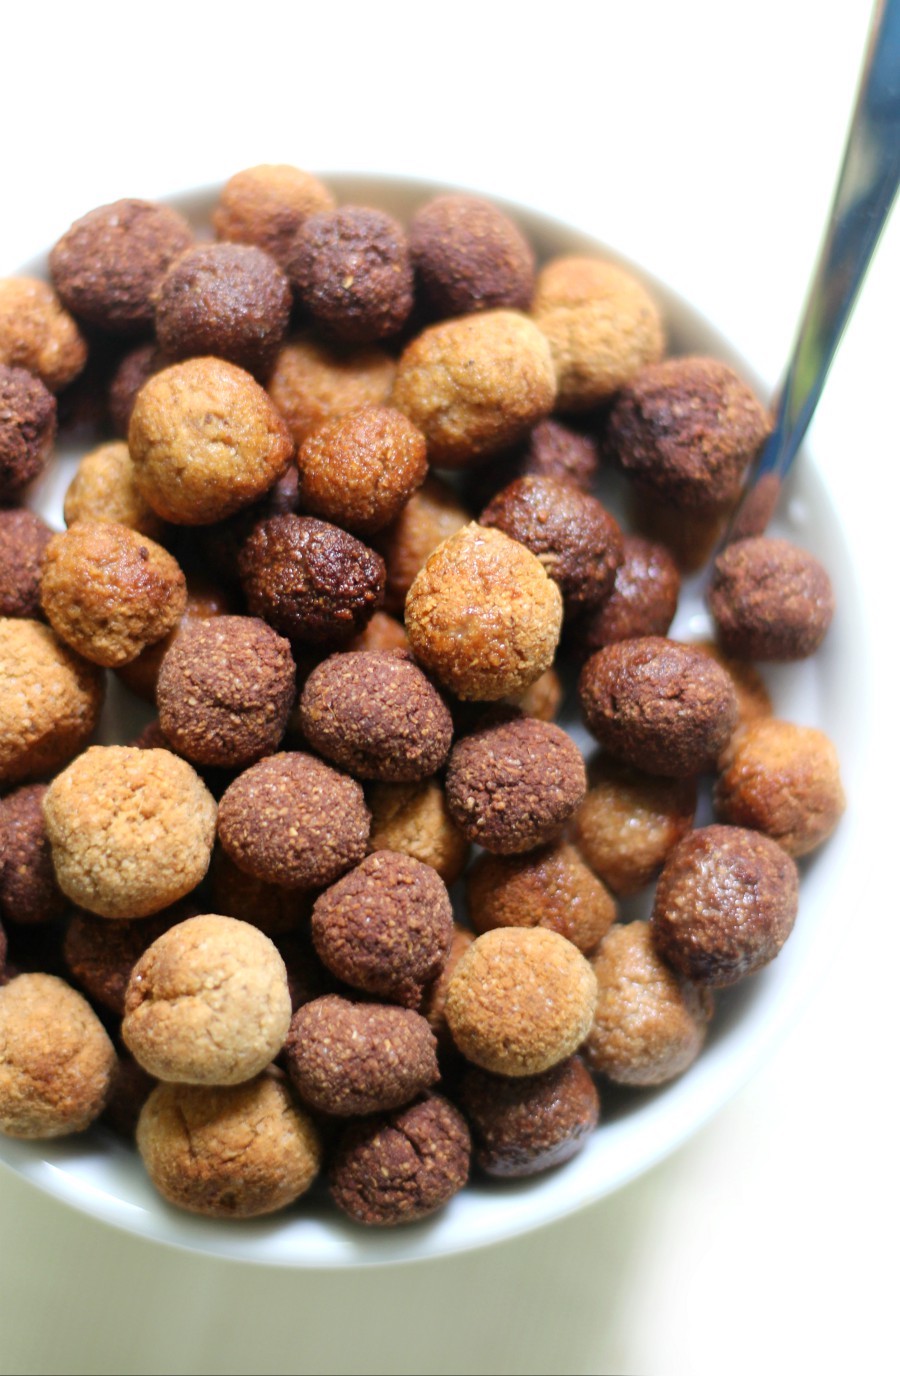 Copycat Gluten-Free Reese's Puffs Cereal (Vegan, Grain-Free) | Strength and Sunshine @RebeccaGF666 Healthy, protein-packed, homemade cereal for breakfast? You will love this recipe for Copycat Gluten-Free Reese's Puffs Cereal that's vegan, grain-free, and sugar-free! Chocolate and peanut butter flavors are just what you need to kickstart your day! #cereal #reeses #breakfast #glutenfree #vegan #grainfree #sugarfree #kidfriendly